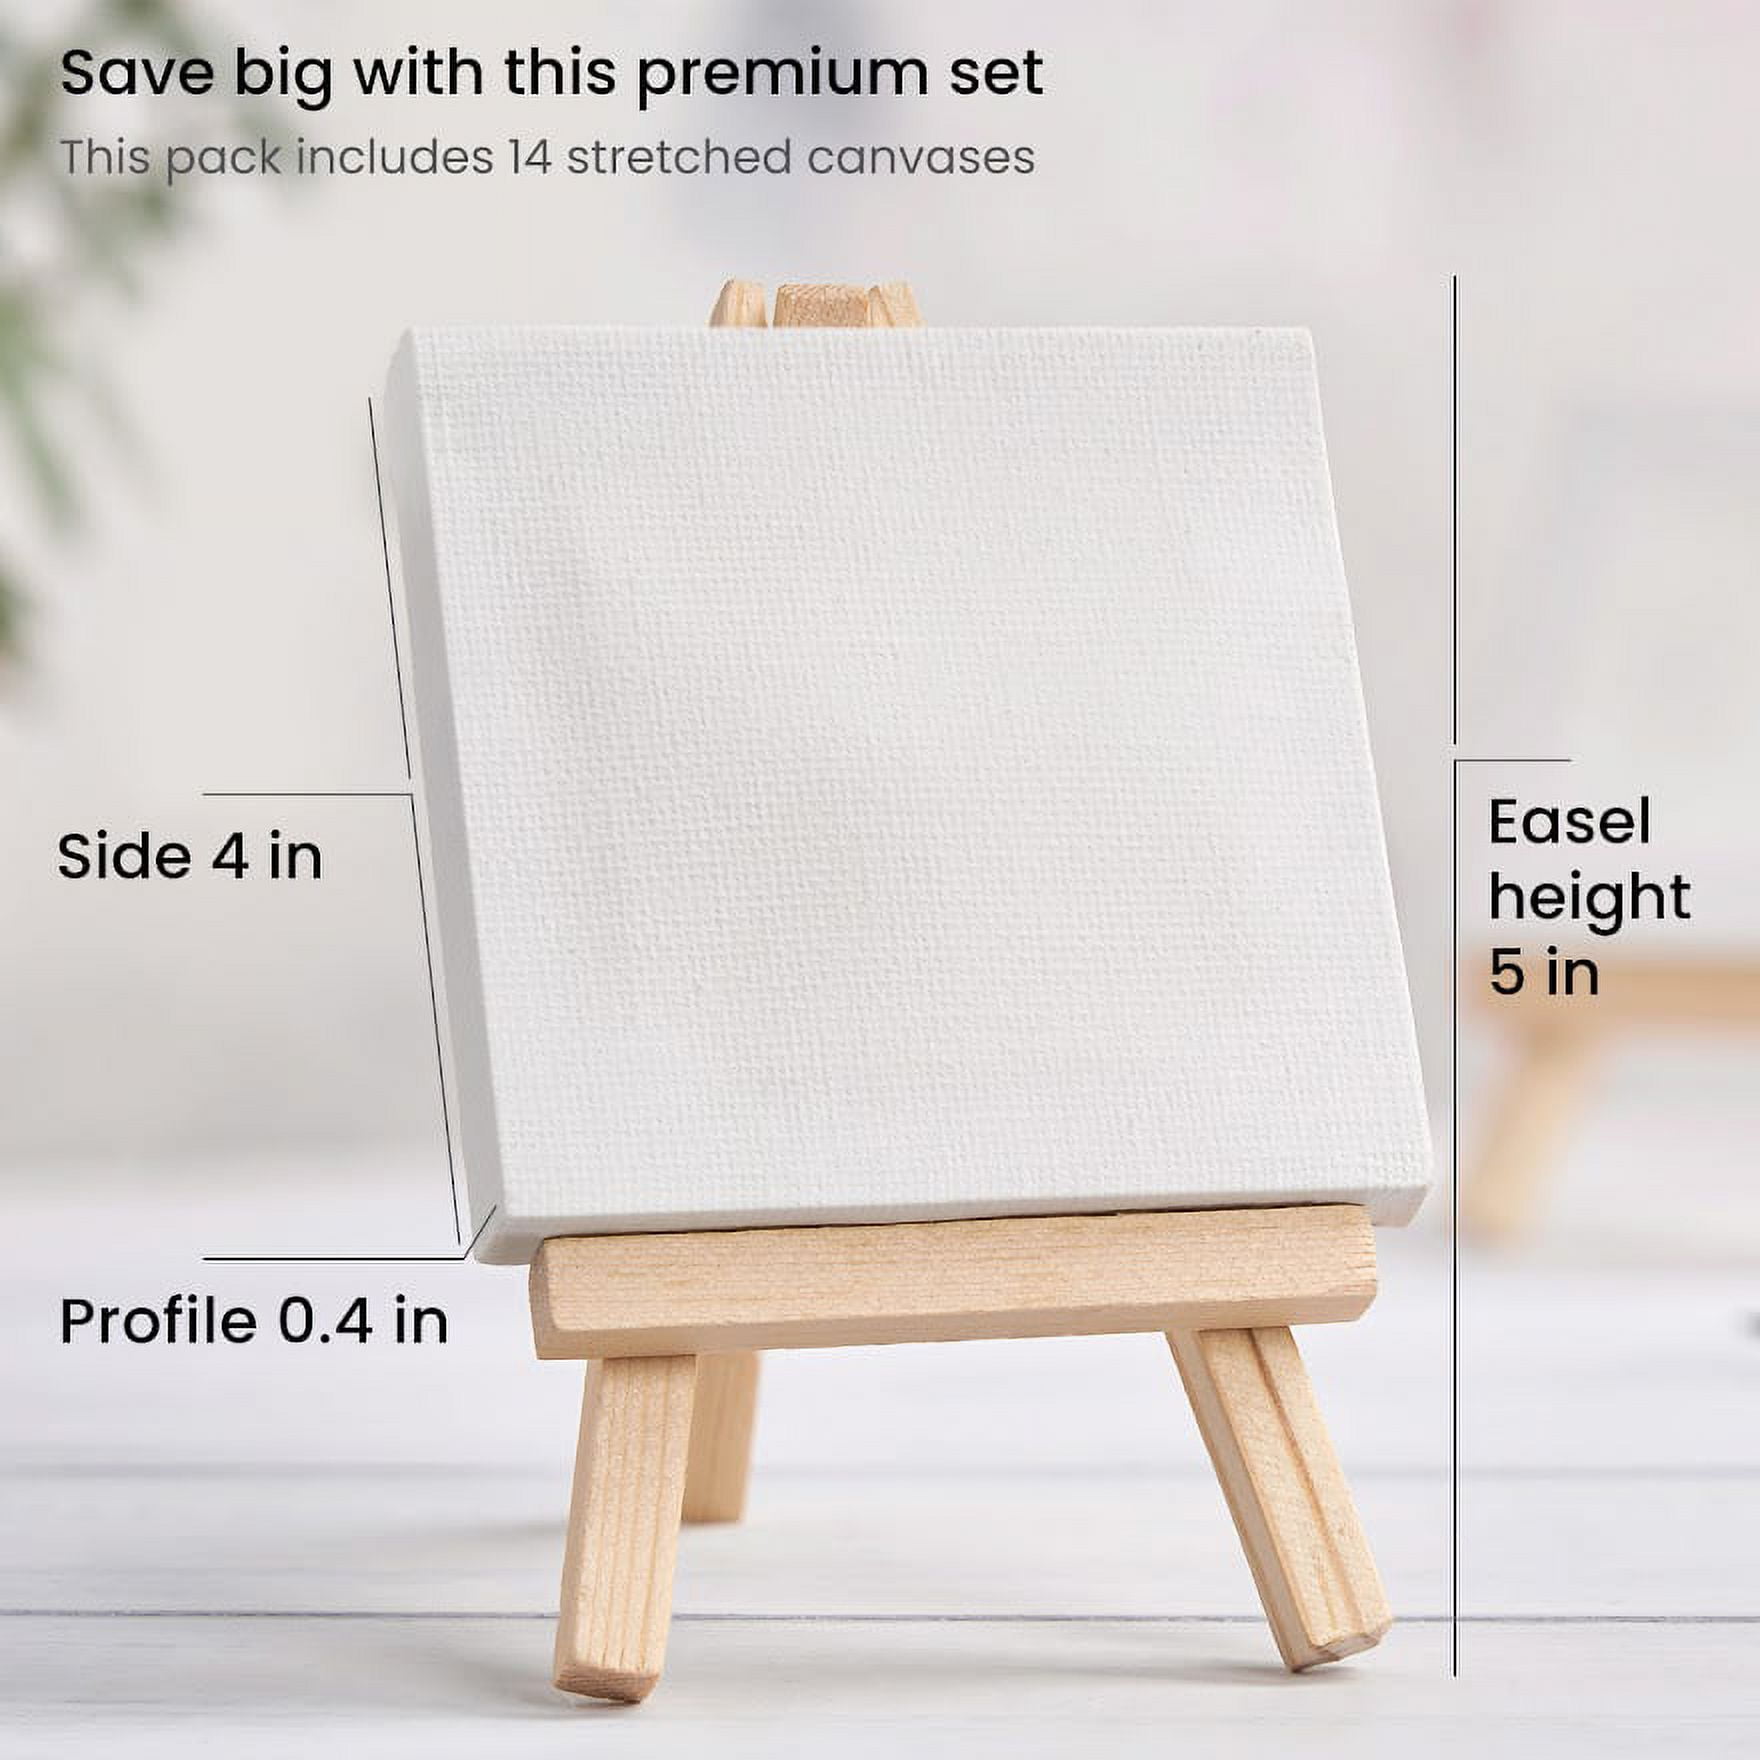 Arteza Small Mini Stretched Canvas, White, 4x4, Blank Canvas Boards for  Painting - 14 Pack